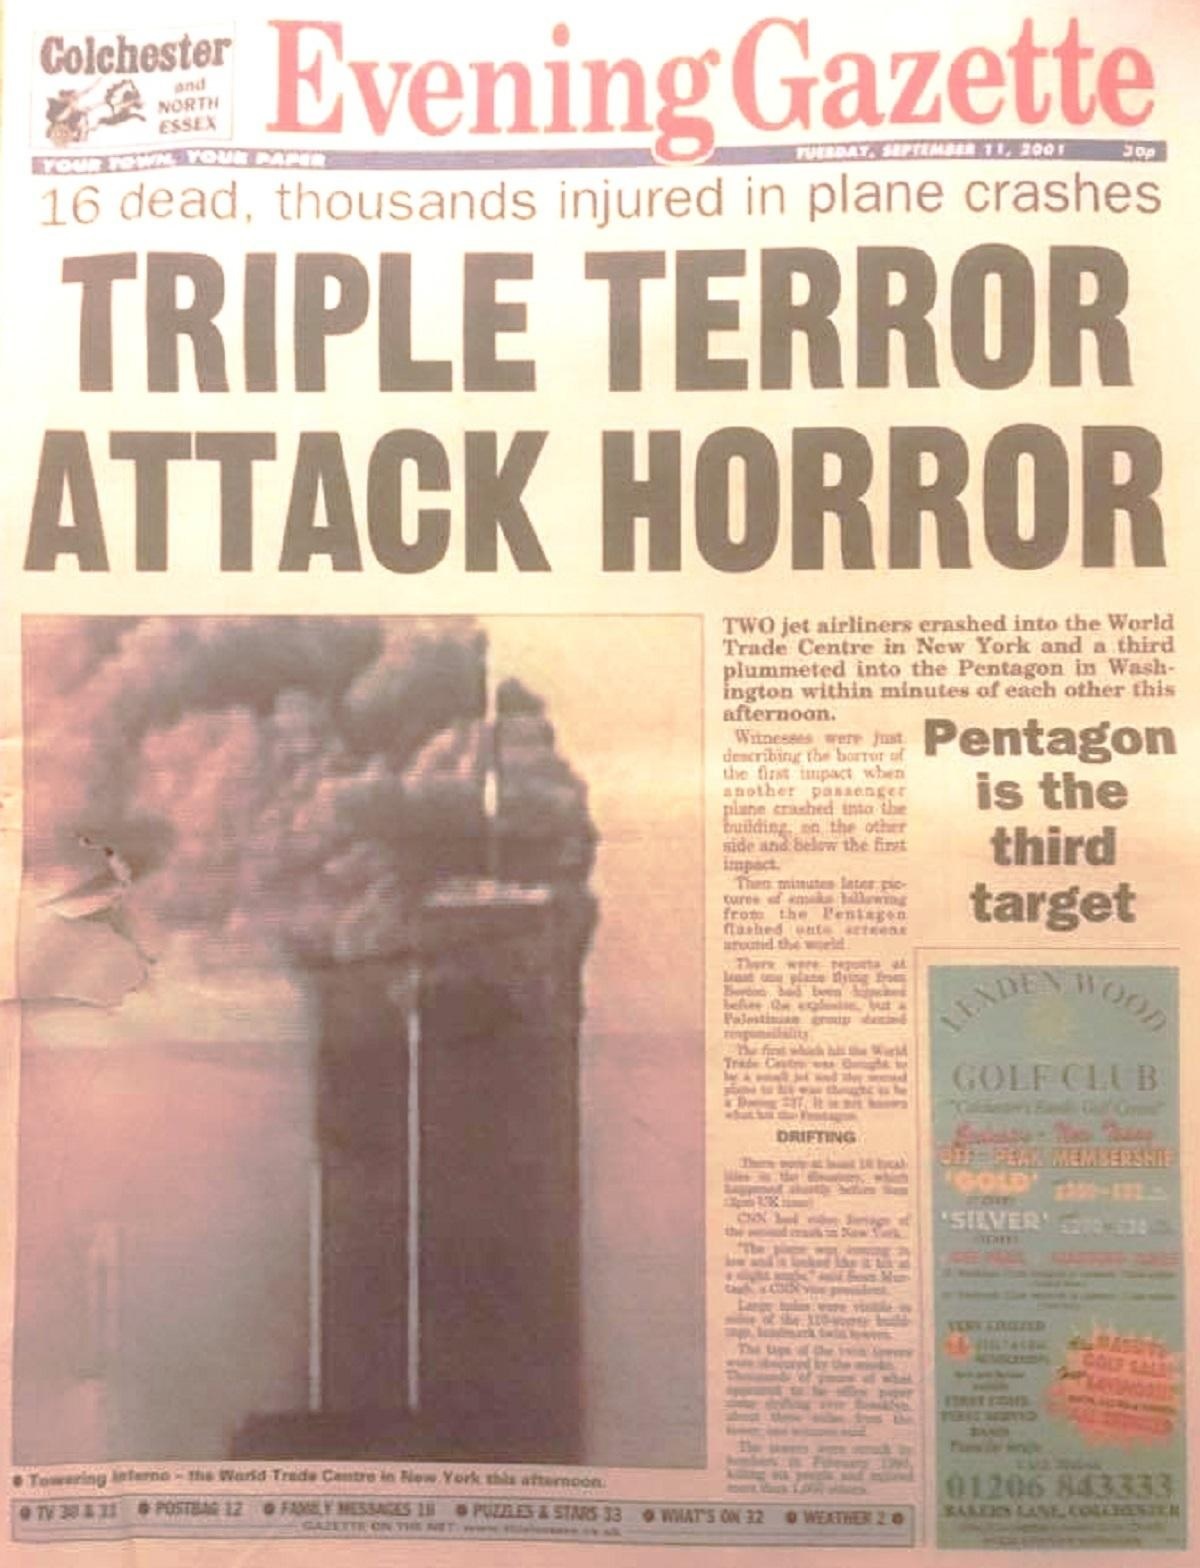 Hot off the press - how we reported the 9/11 terror attack in 2001. The horror sparked dramatic scenes in our newsroom and is remembered by Victoria Weaver